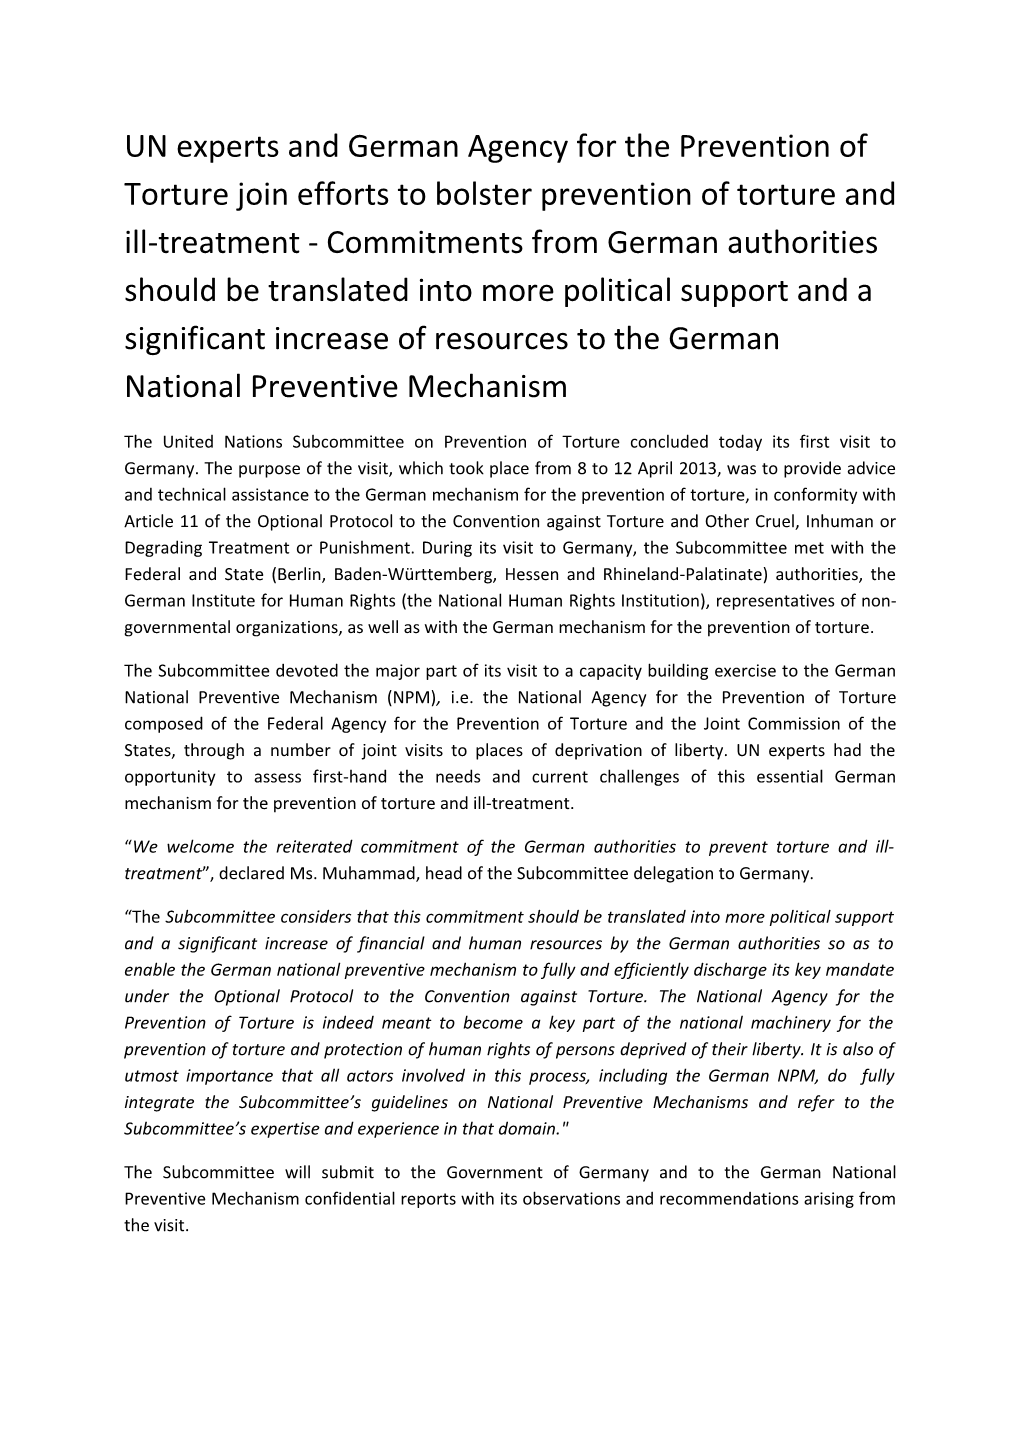 UN Experts and German Agency for the Prevention of Torture Join Efforts to Bolster Prevention